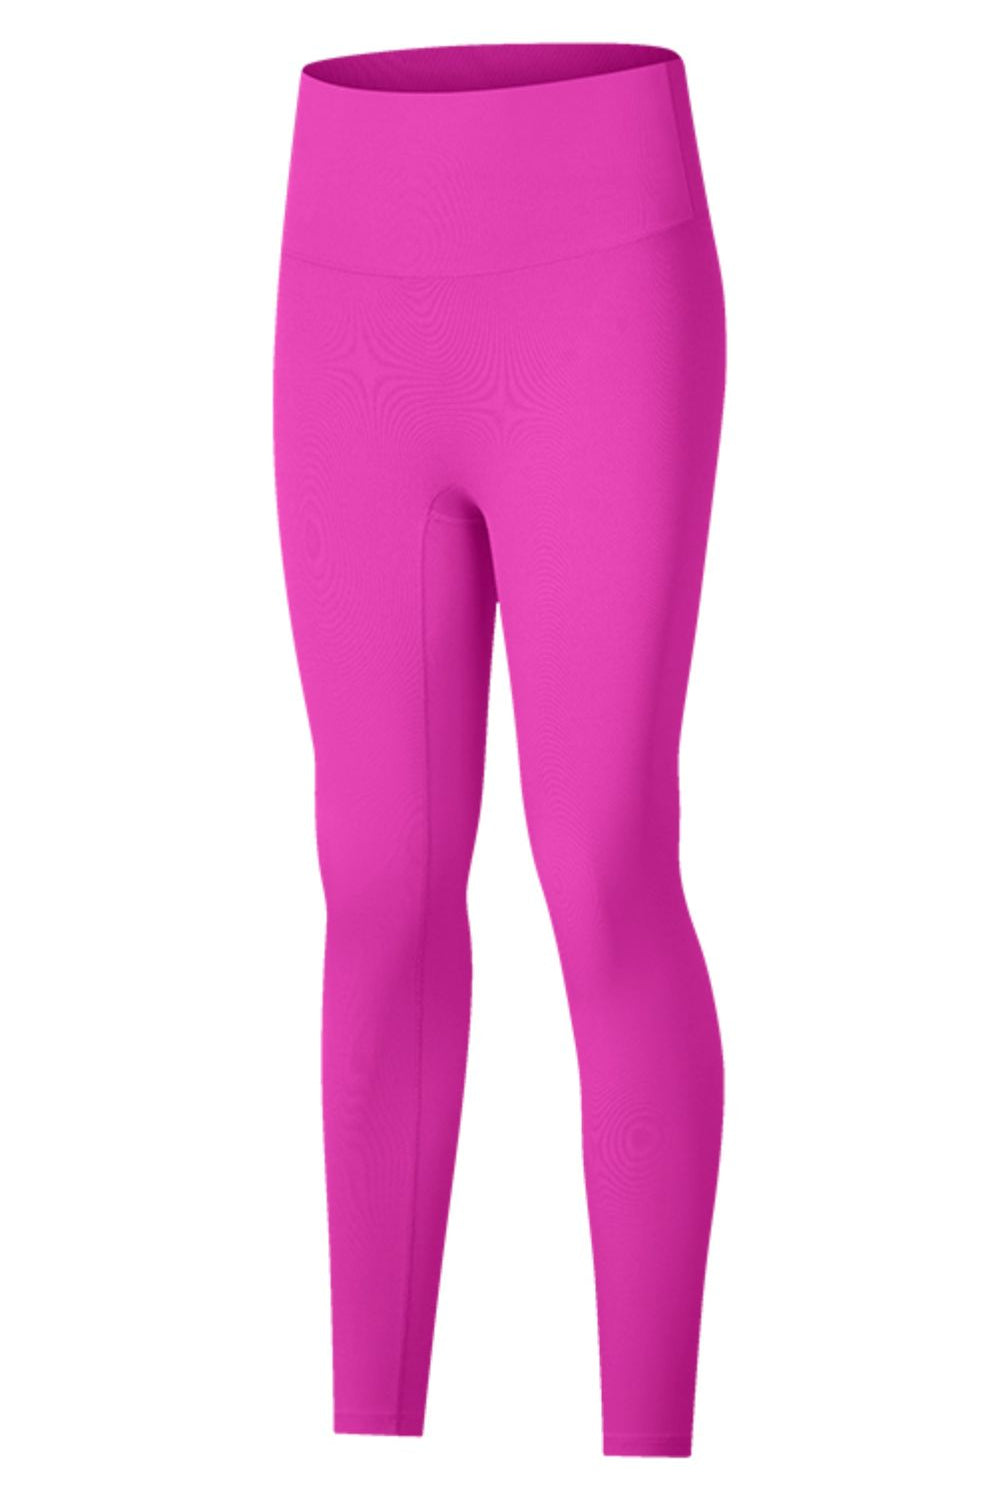 Violet Red High-Rise Wide Waistband Yoga Leggings activewear